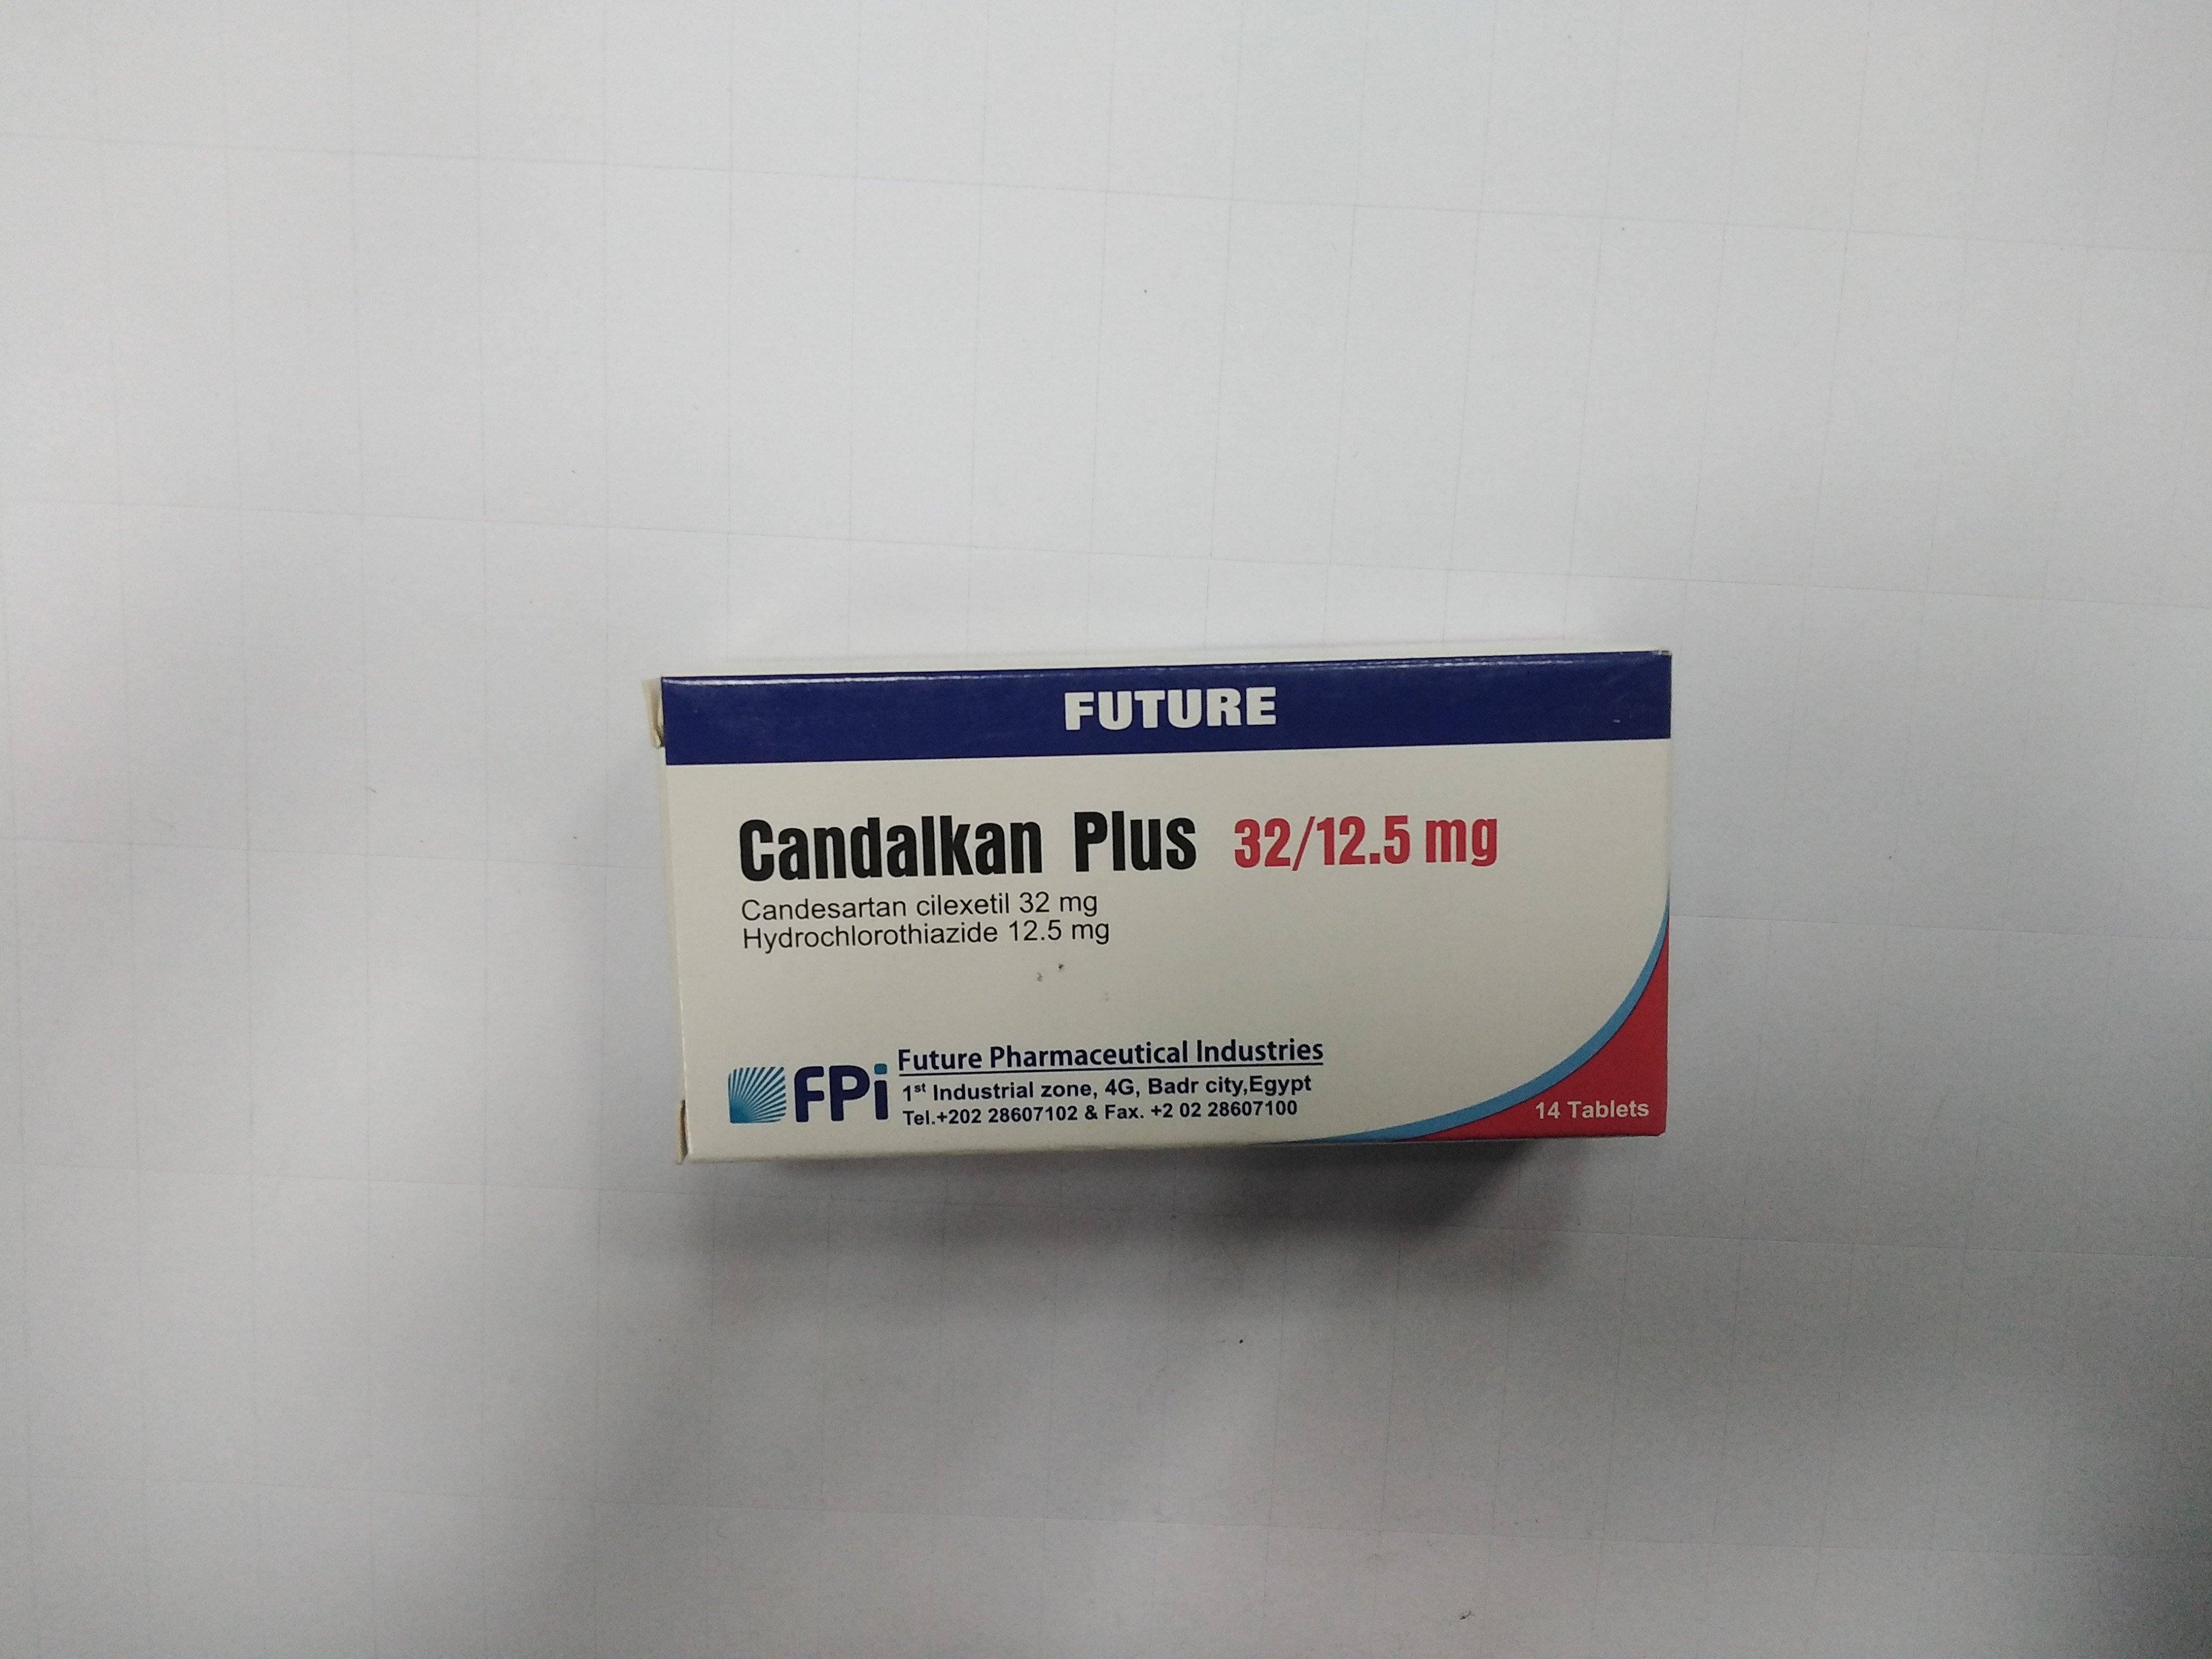 Candalkan plus 32/12.5 mg 14 Tablets